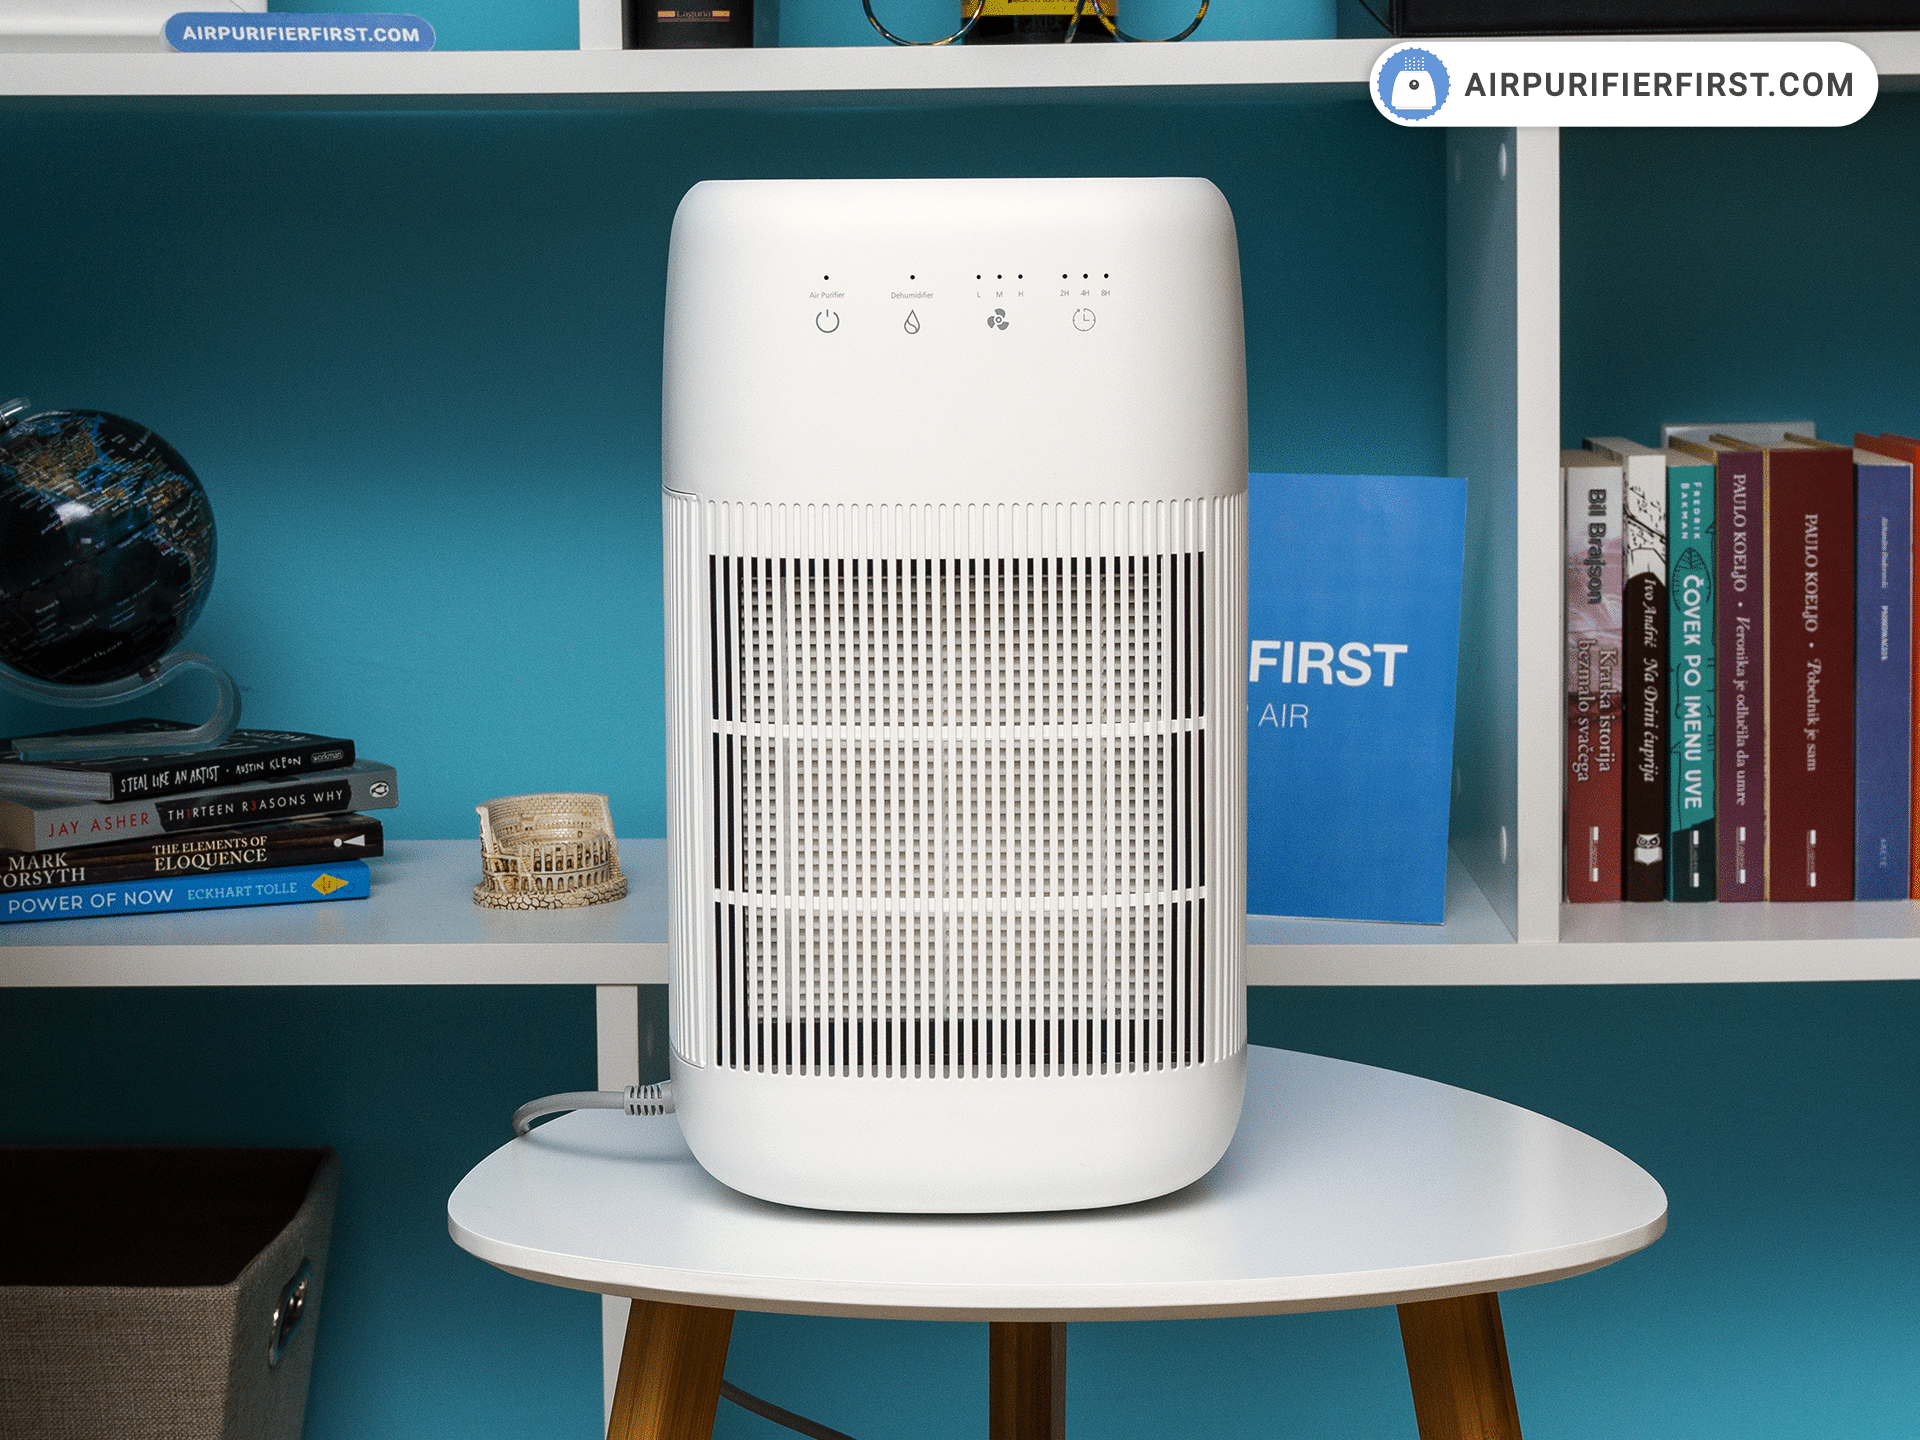 Afloia Q10 - Best Air Purifier and Dehumidifier Combos